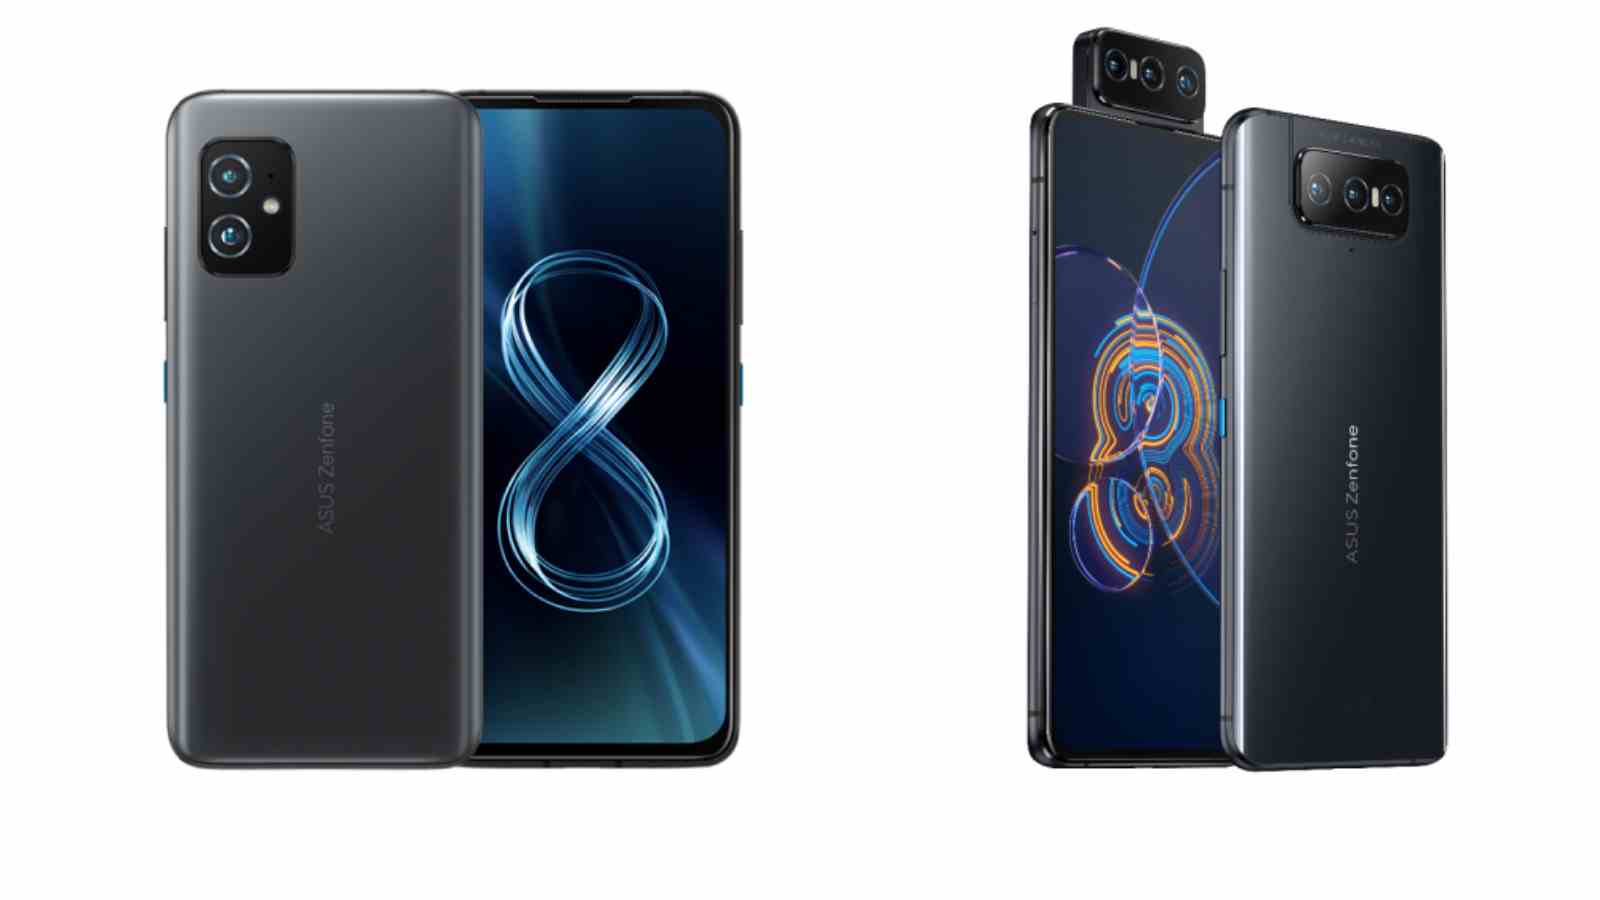 ASUS Zenfone 8 Flip , Zenfone 8 Flip with AMOLED display, Snapdragon 888 launched: Price, Specifications